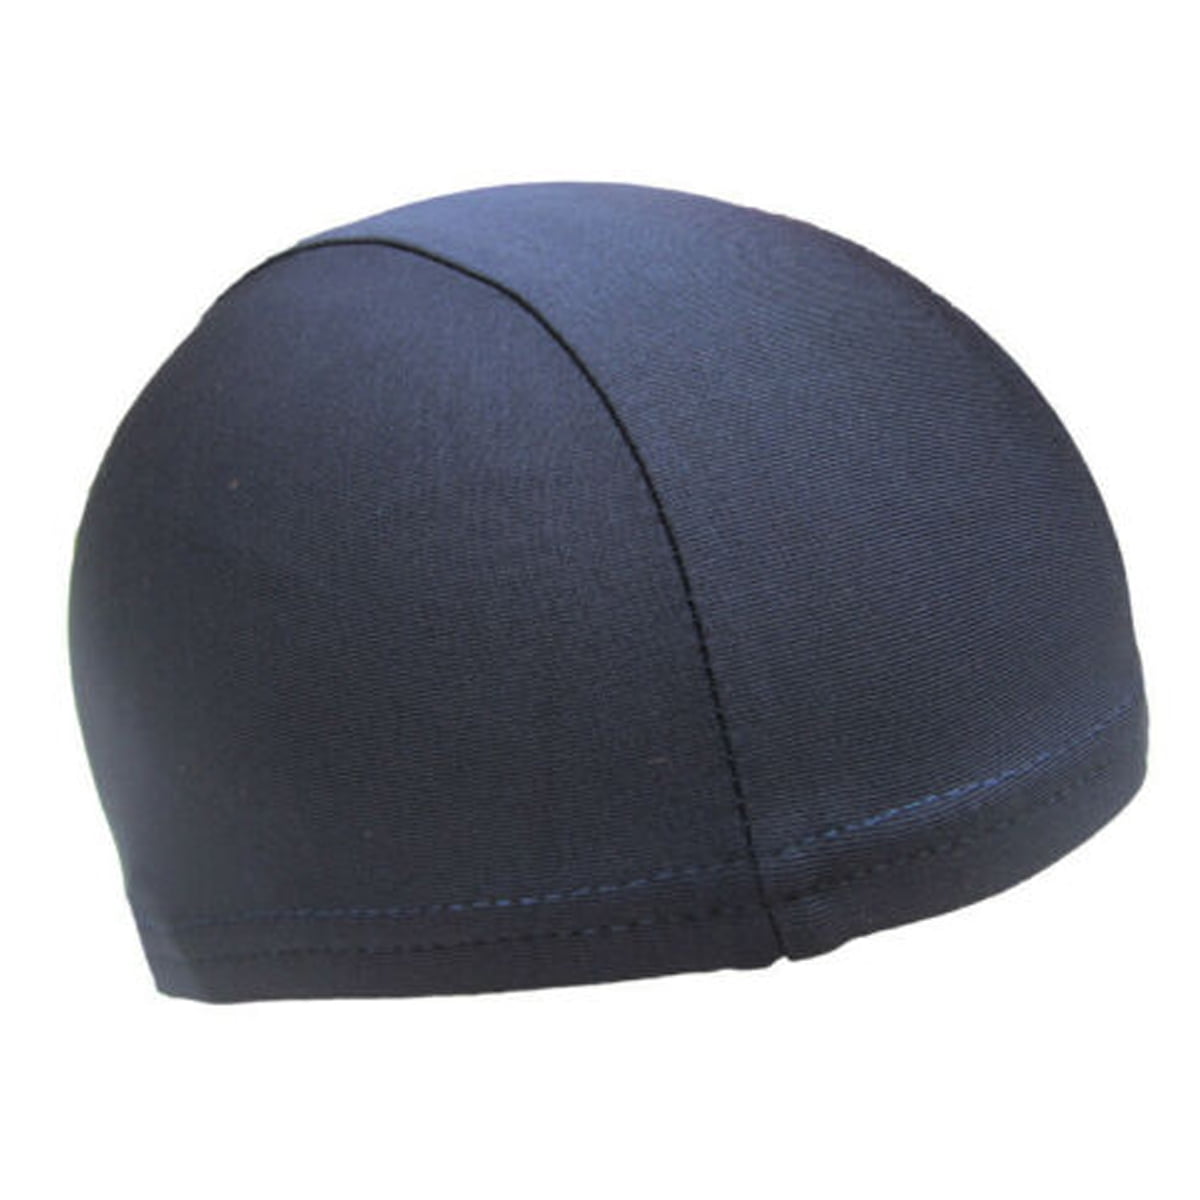 Unisex Skull Cap Quick Dry Sports Sweat Beanie Hat Great Cycling Moto Dome Caps